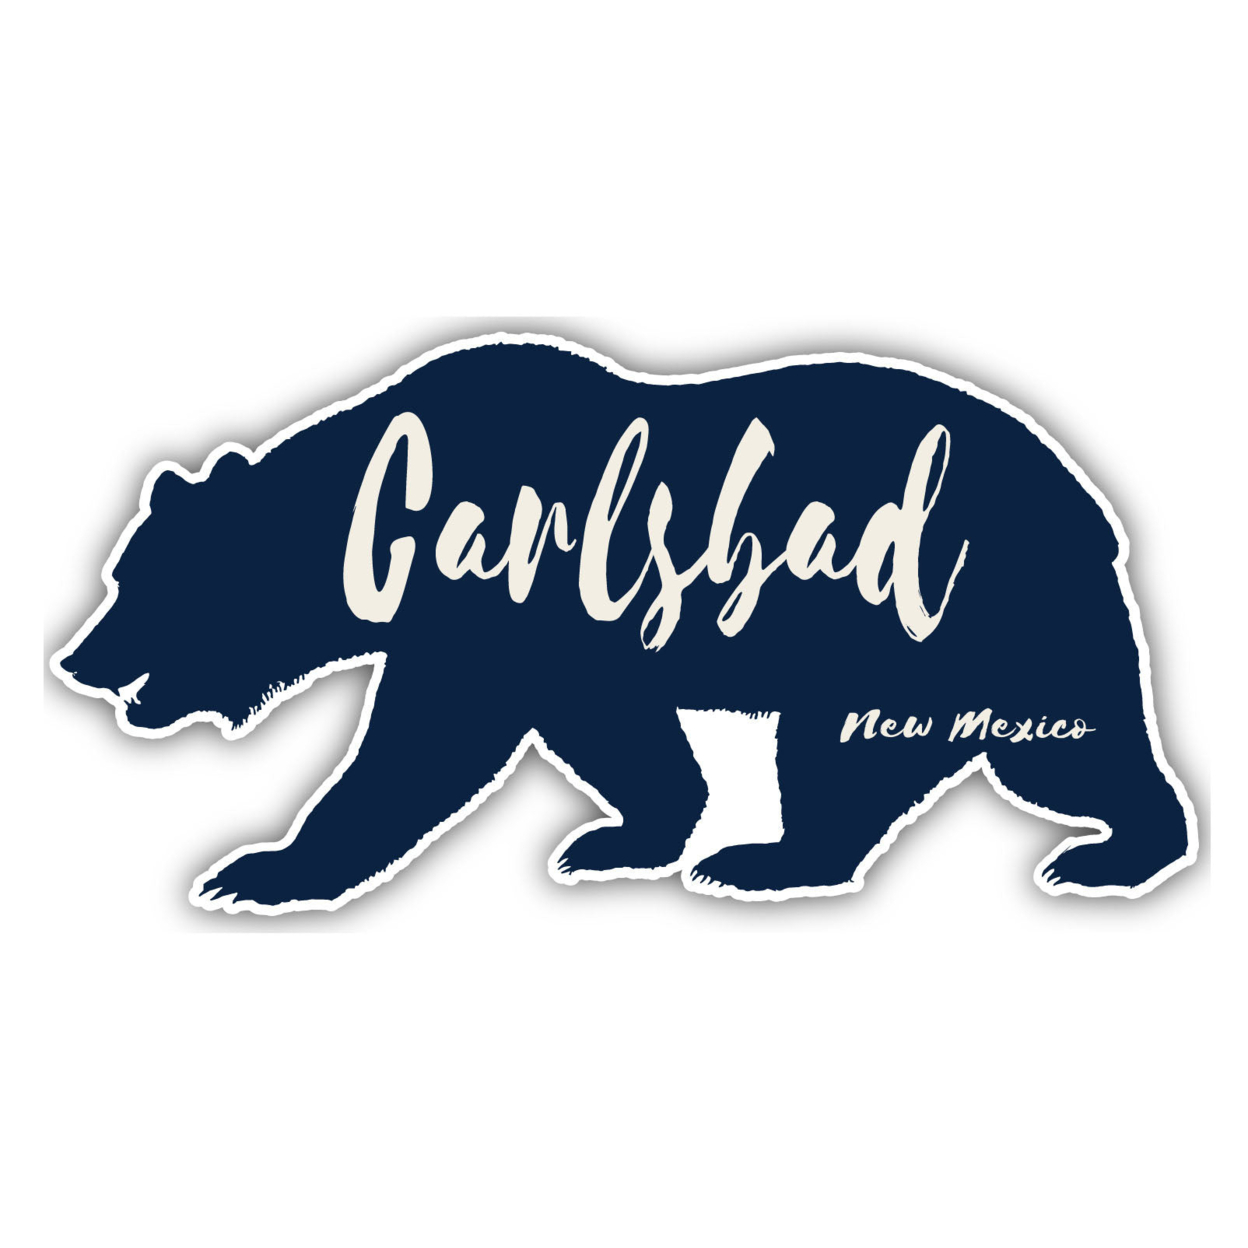 Carlsbad New Mexico Souvenir Decorative Stickers (Choose Theme And Size) - 4-Pack, 6-Inch, Bear